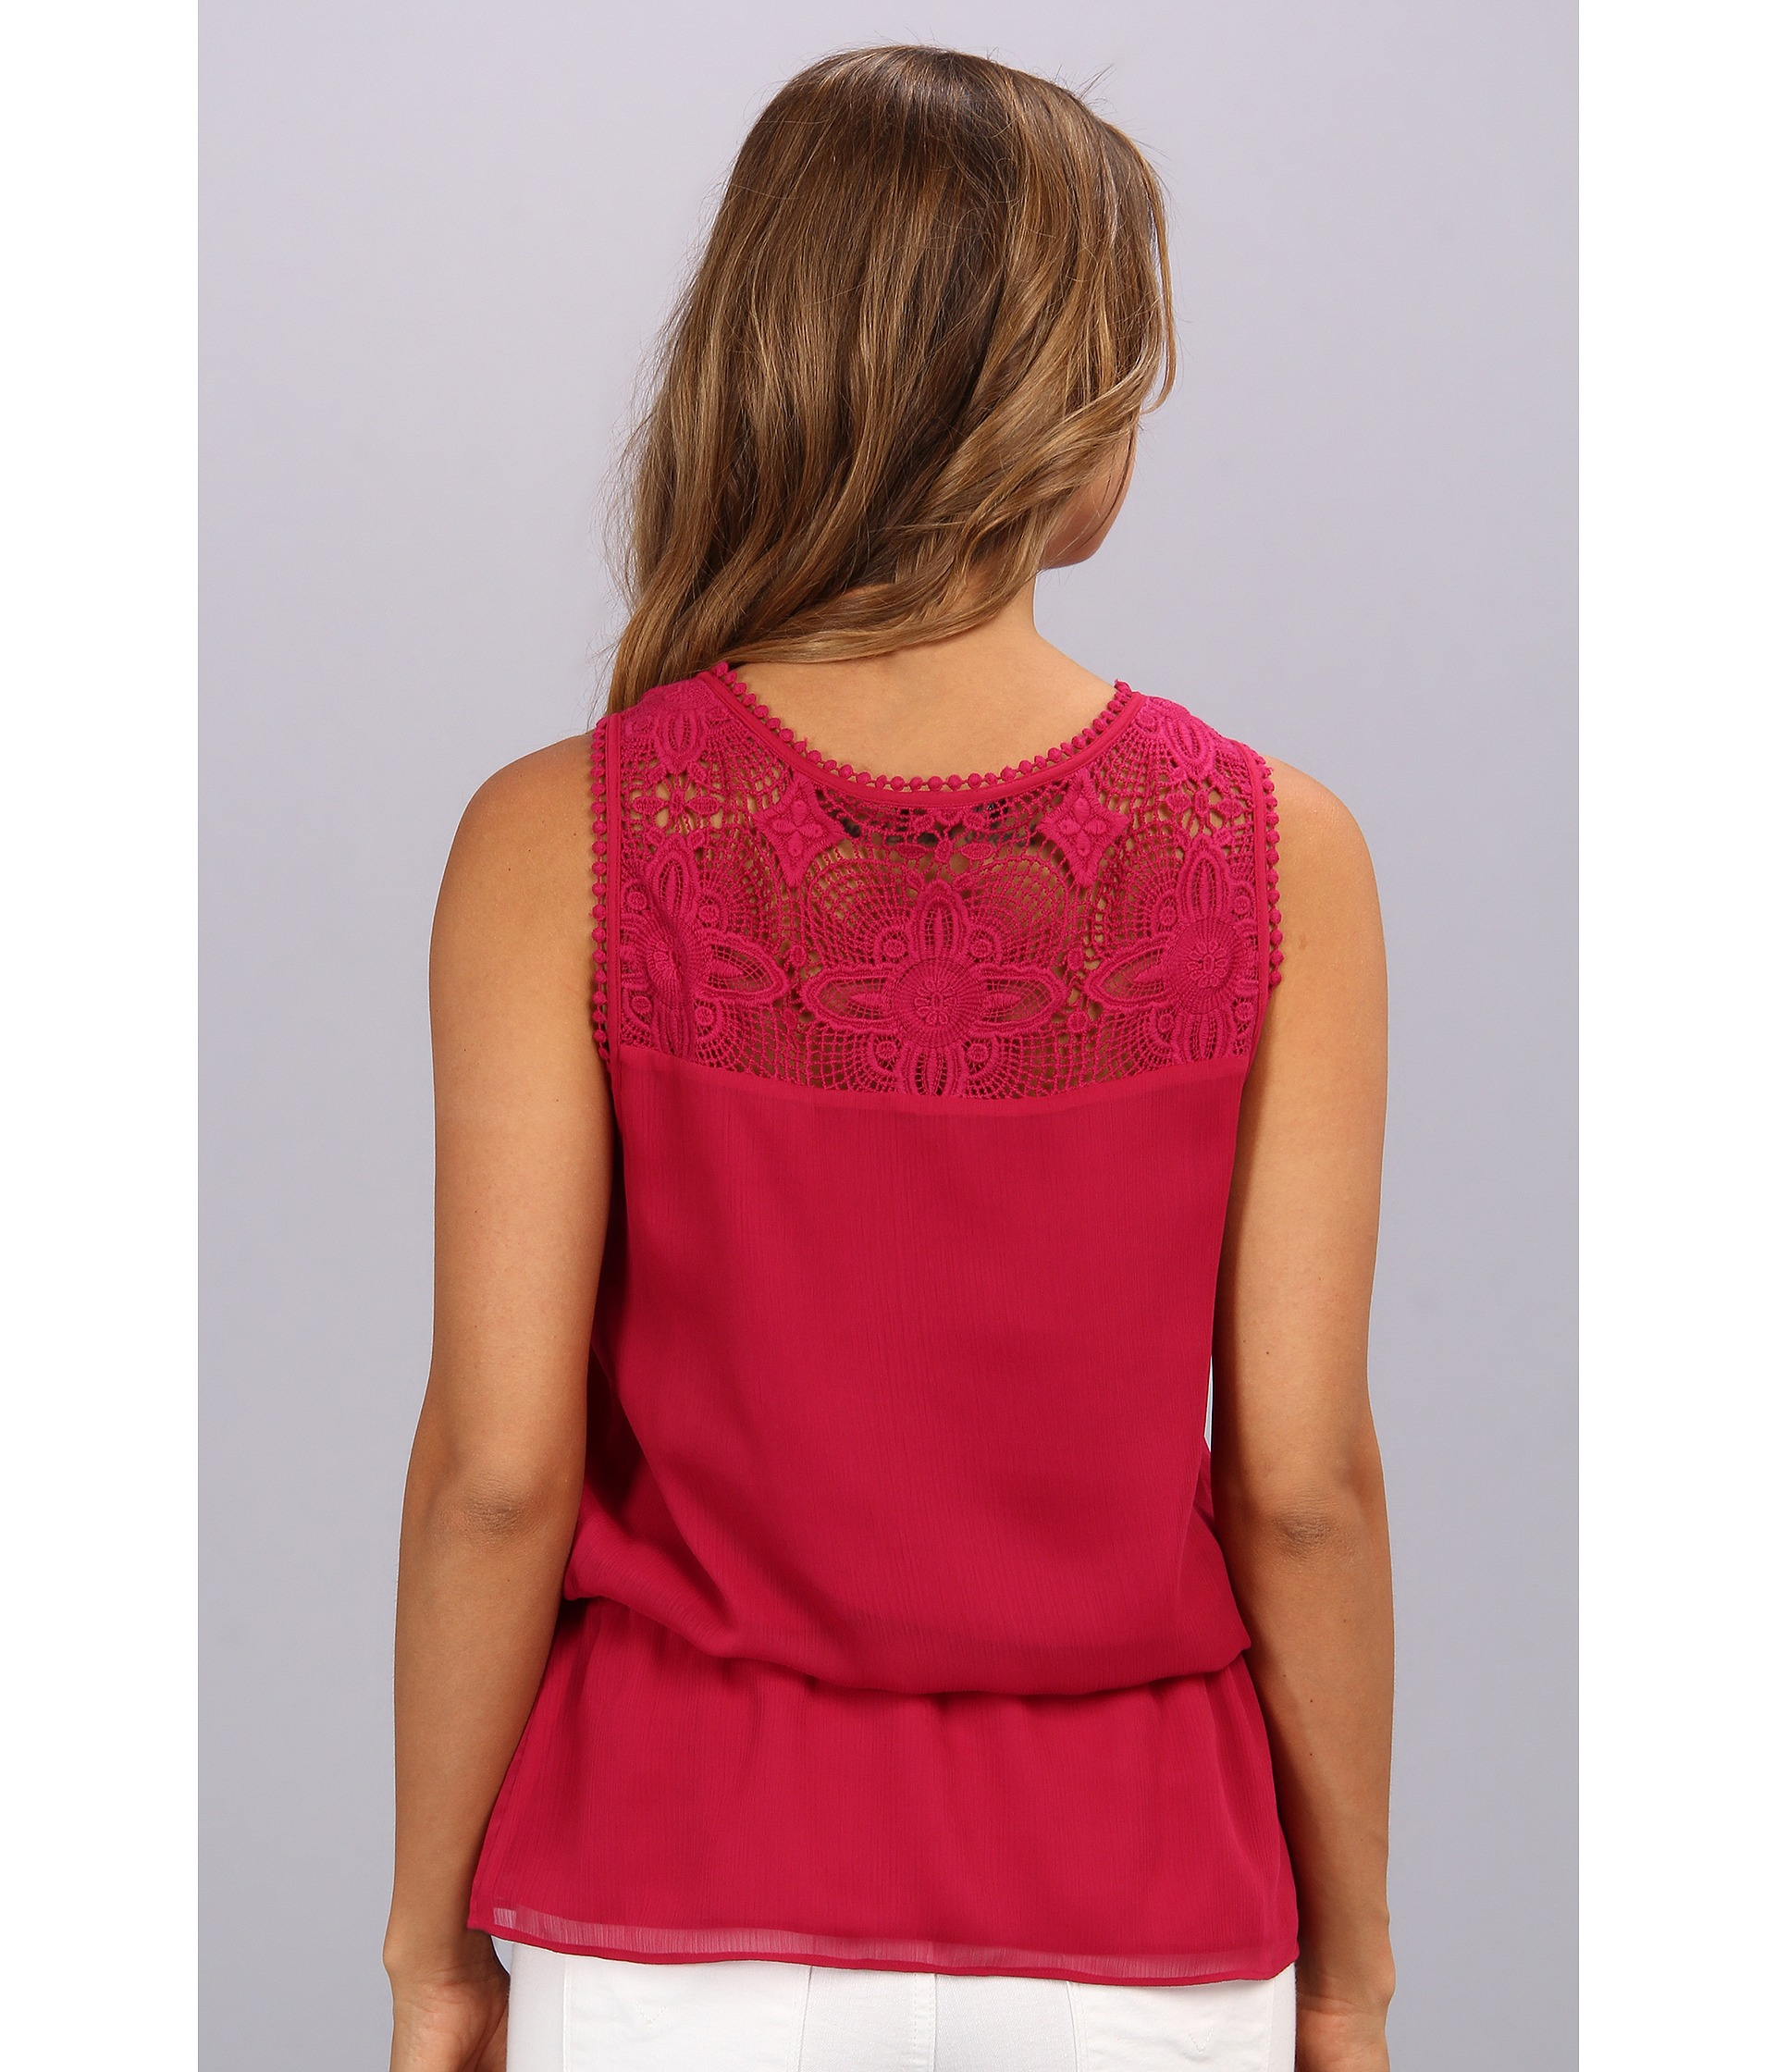 Lyst - Adrianna Papell Sleeveless Blouse W Lace Trim Peplum Detail in Red